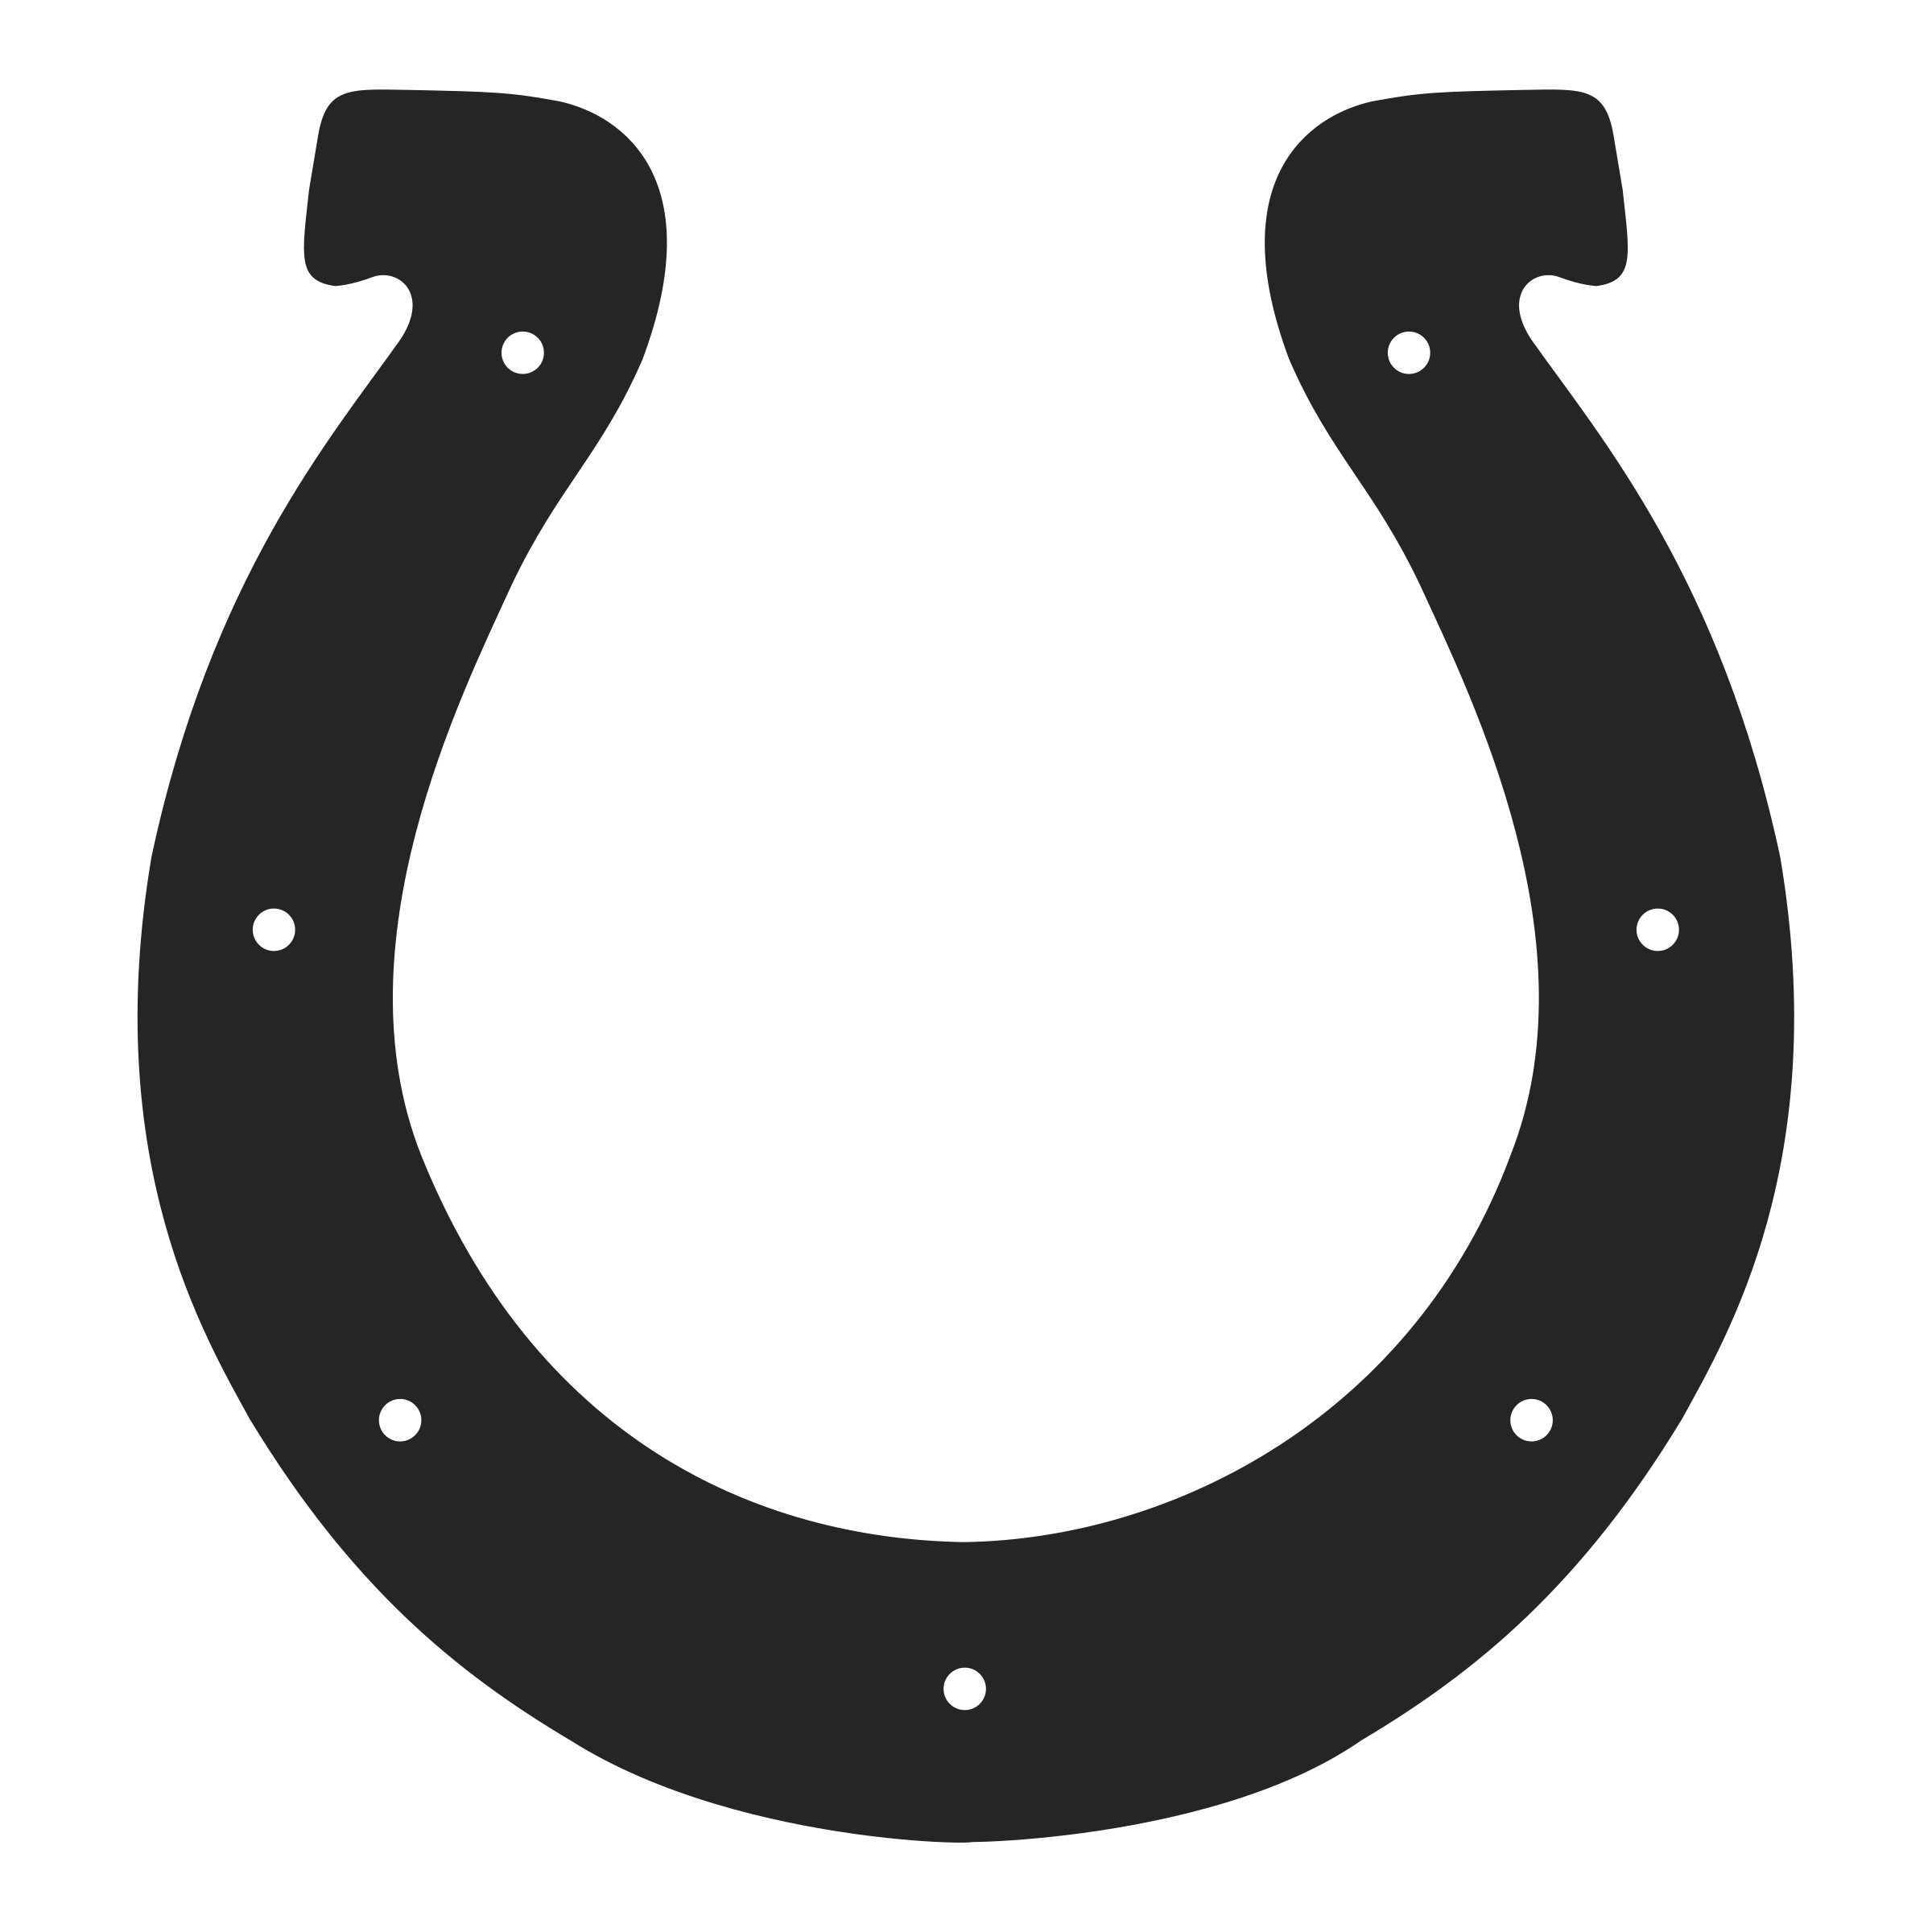 Colts Logo - Indianapolis Colts Logo PNG Transparent & SVG Vector - Freebie Supply